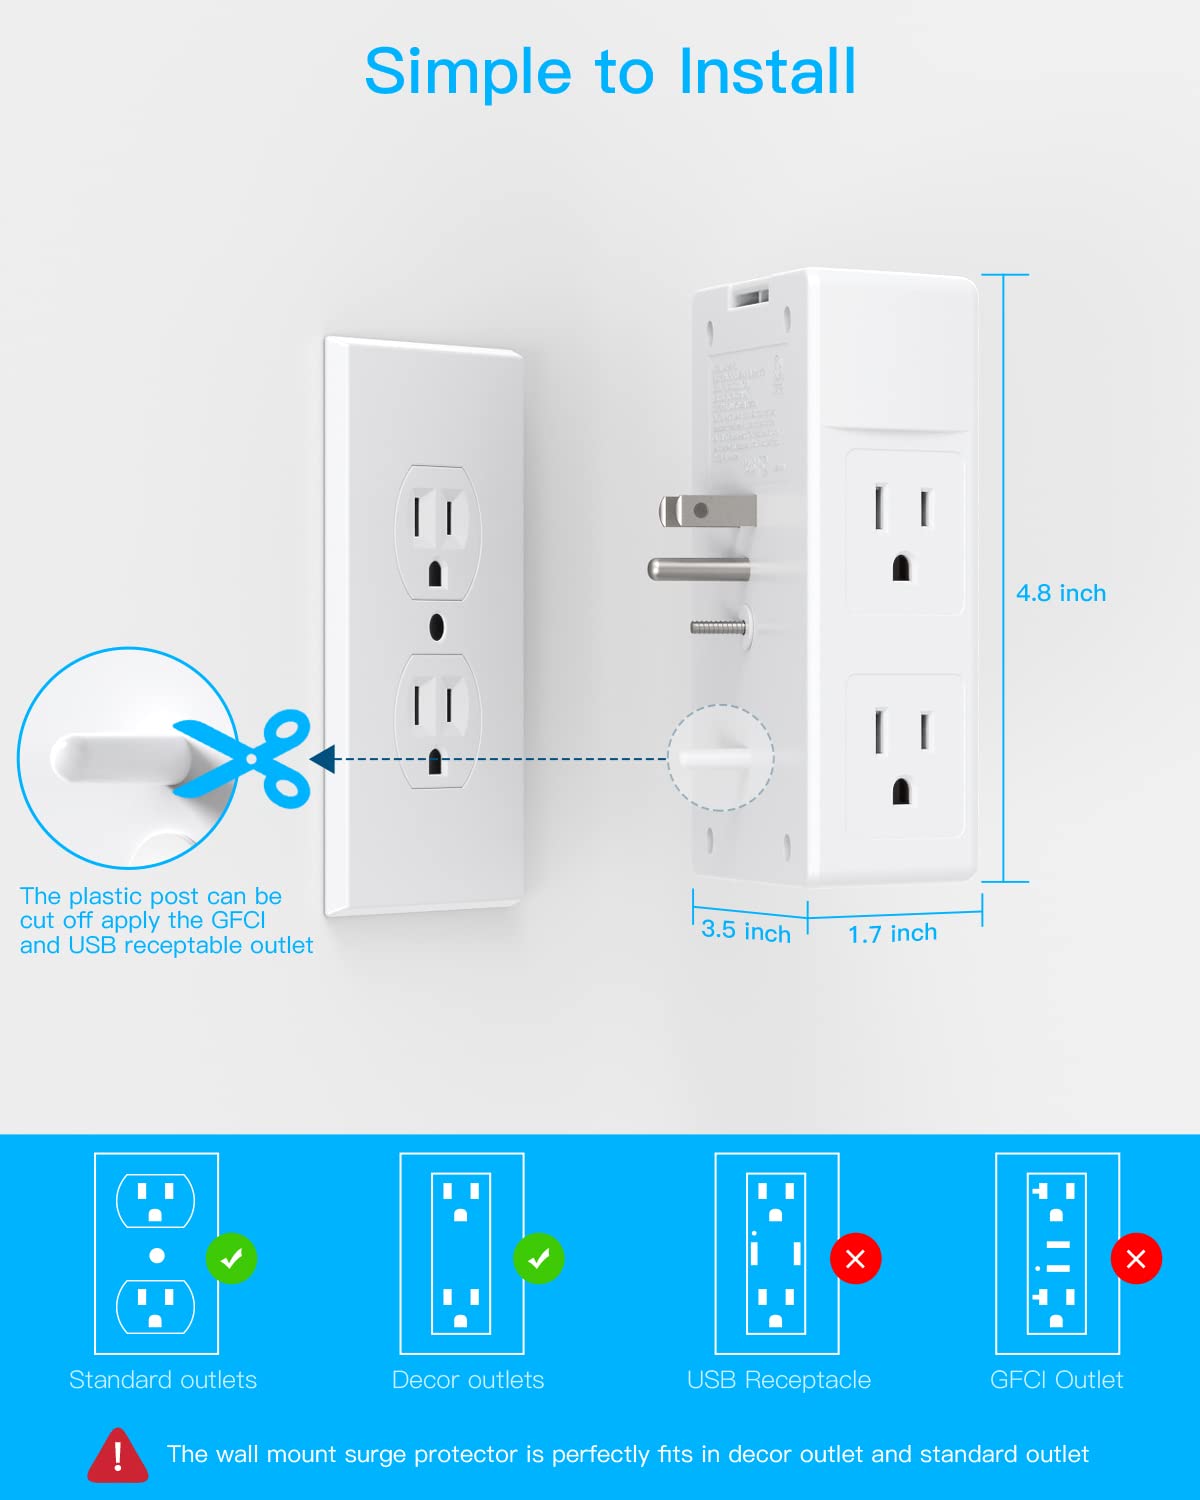 Multi Plug Outlet, Surge Protector, 5 Outlet Extender with 4 USB Charging Ports (2 USB C), USB Wall Charger, 3-Sided 1800J Power Strip Outlets Splitter Wall Plug Adapter Spaced for Home Office Dorm